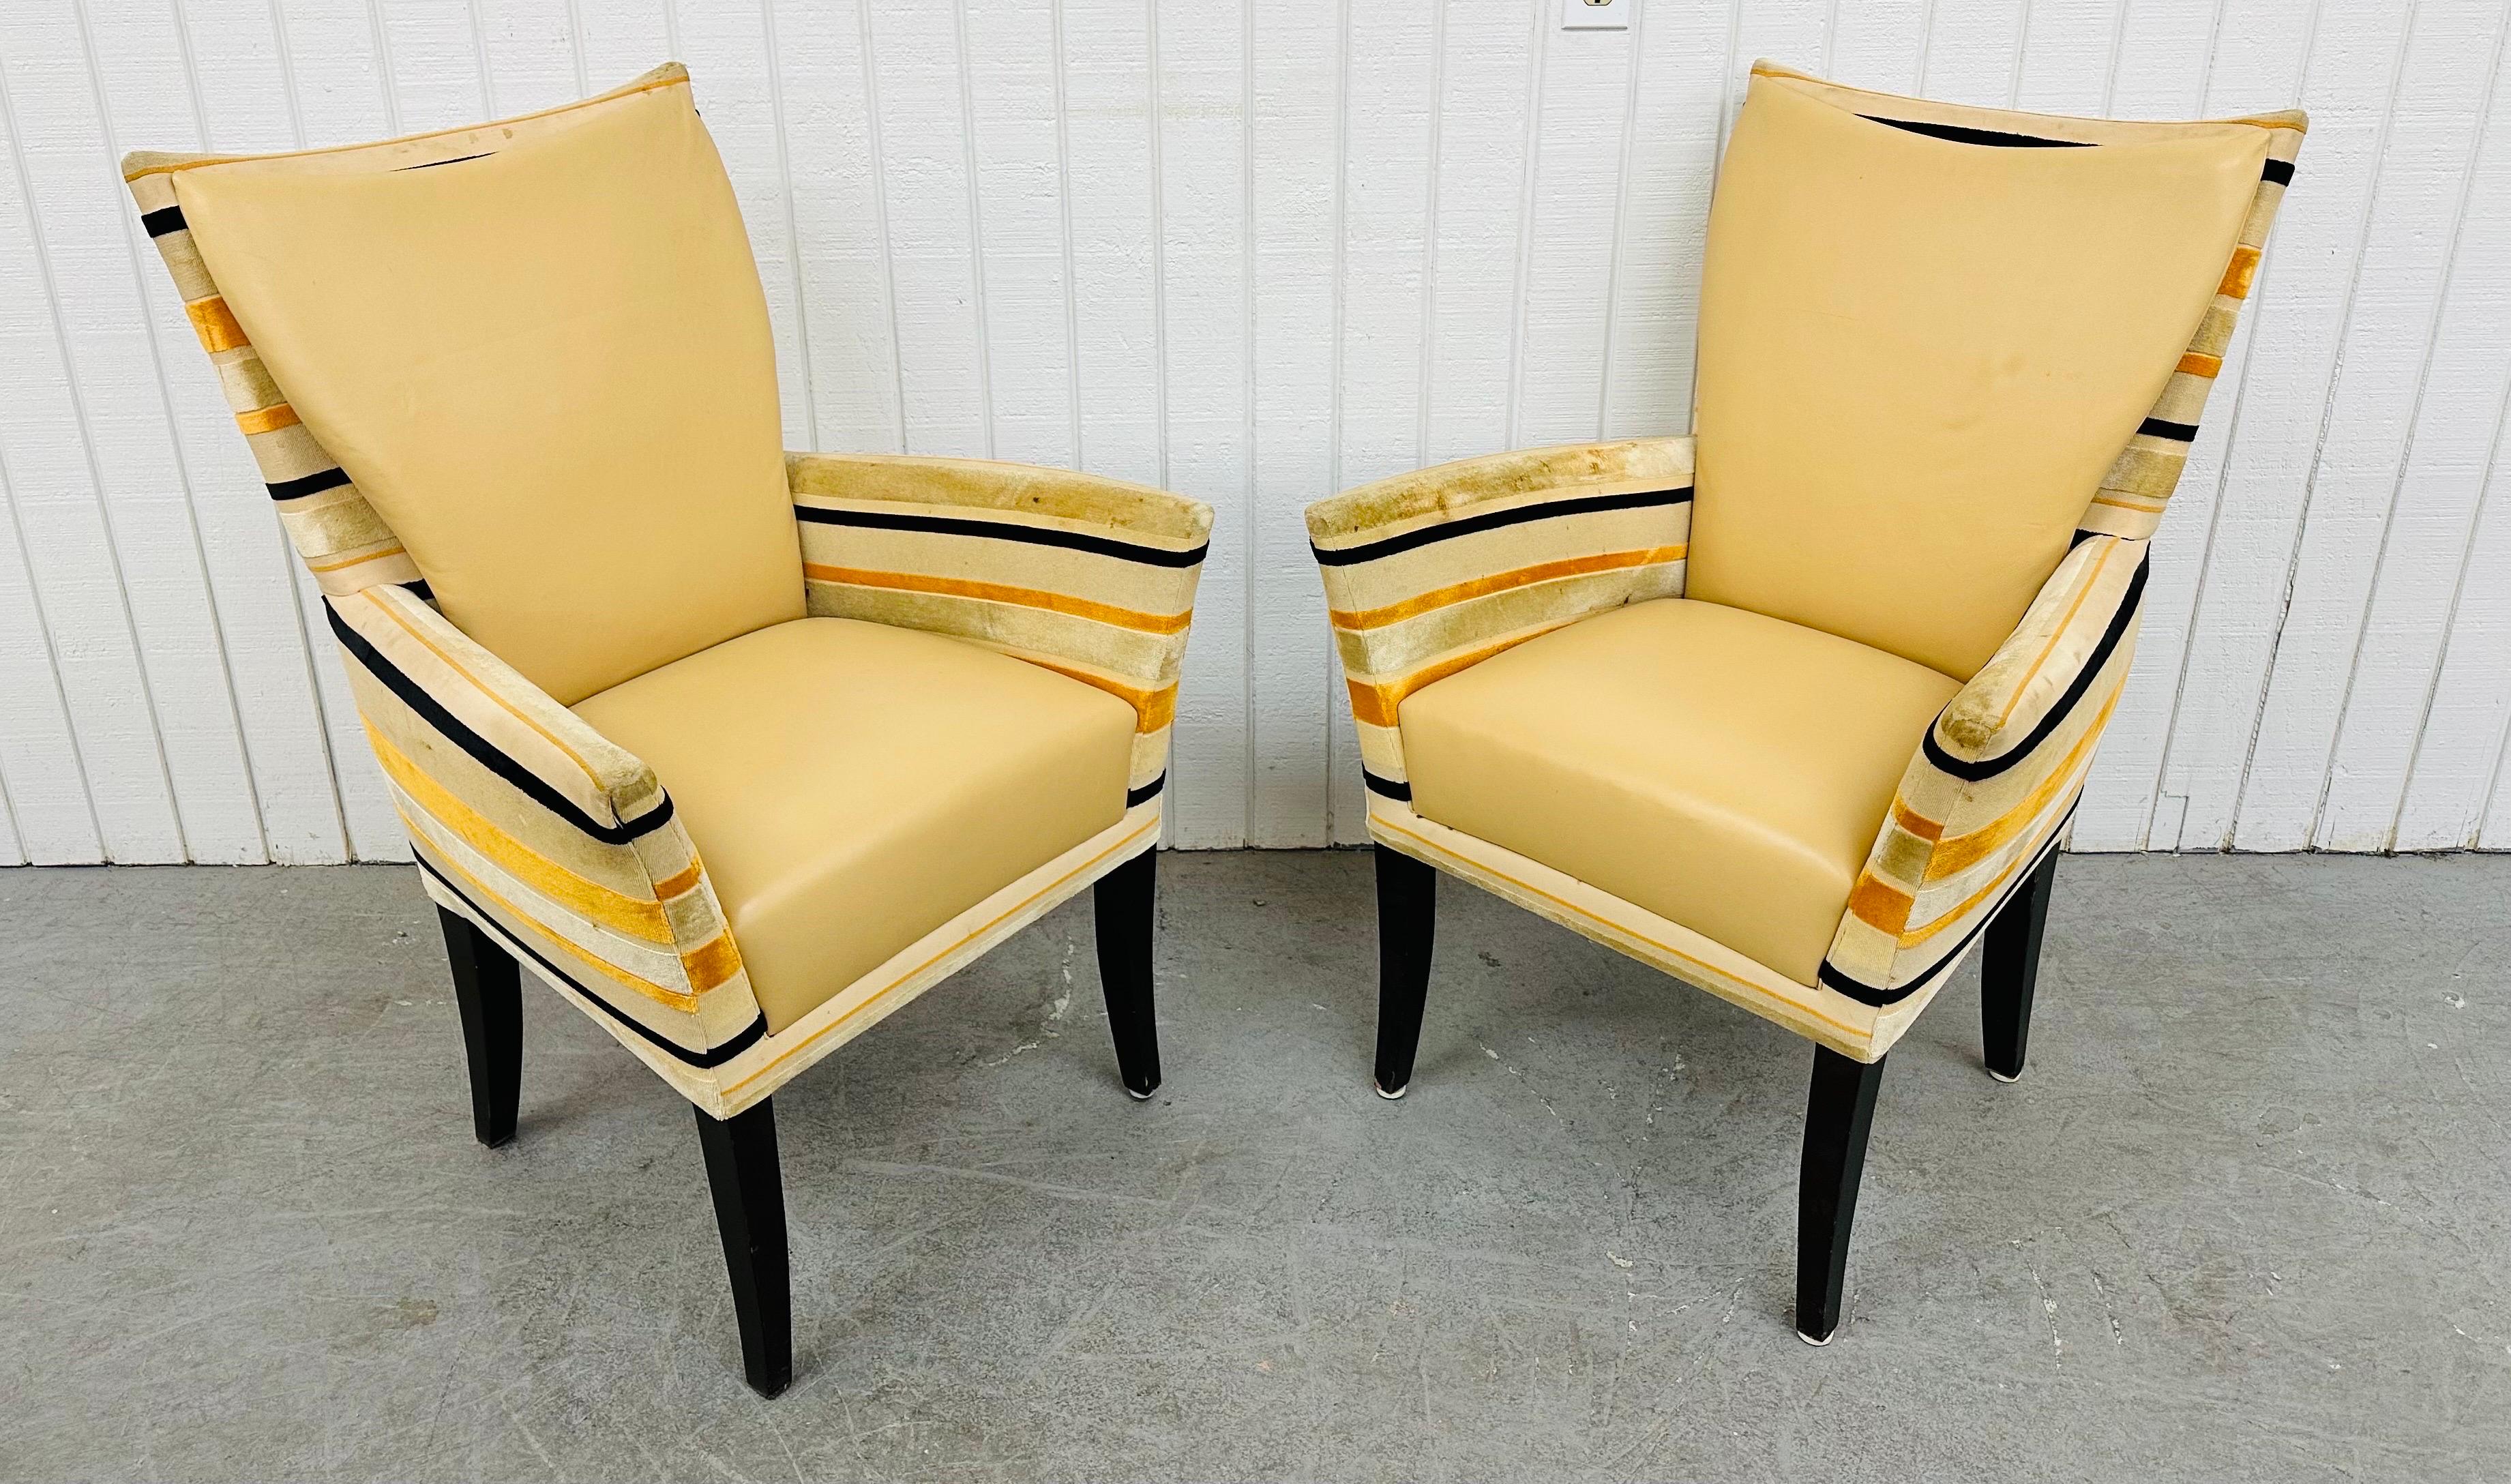 This listing is for a pair of vintage Deco style lounge chairs. Featuring a straight line design, vinyl backrests / seat cushions, striped upholstered frames, tapered wooden legs, and a solid structure. This is an exceptional combination of quality